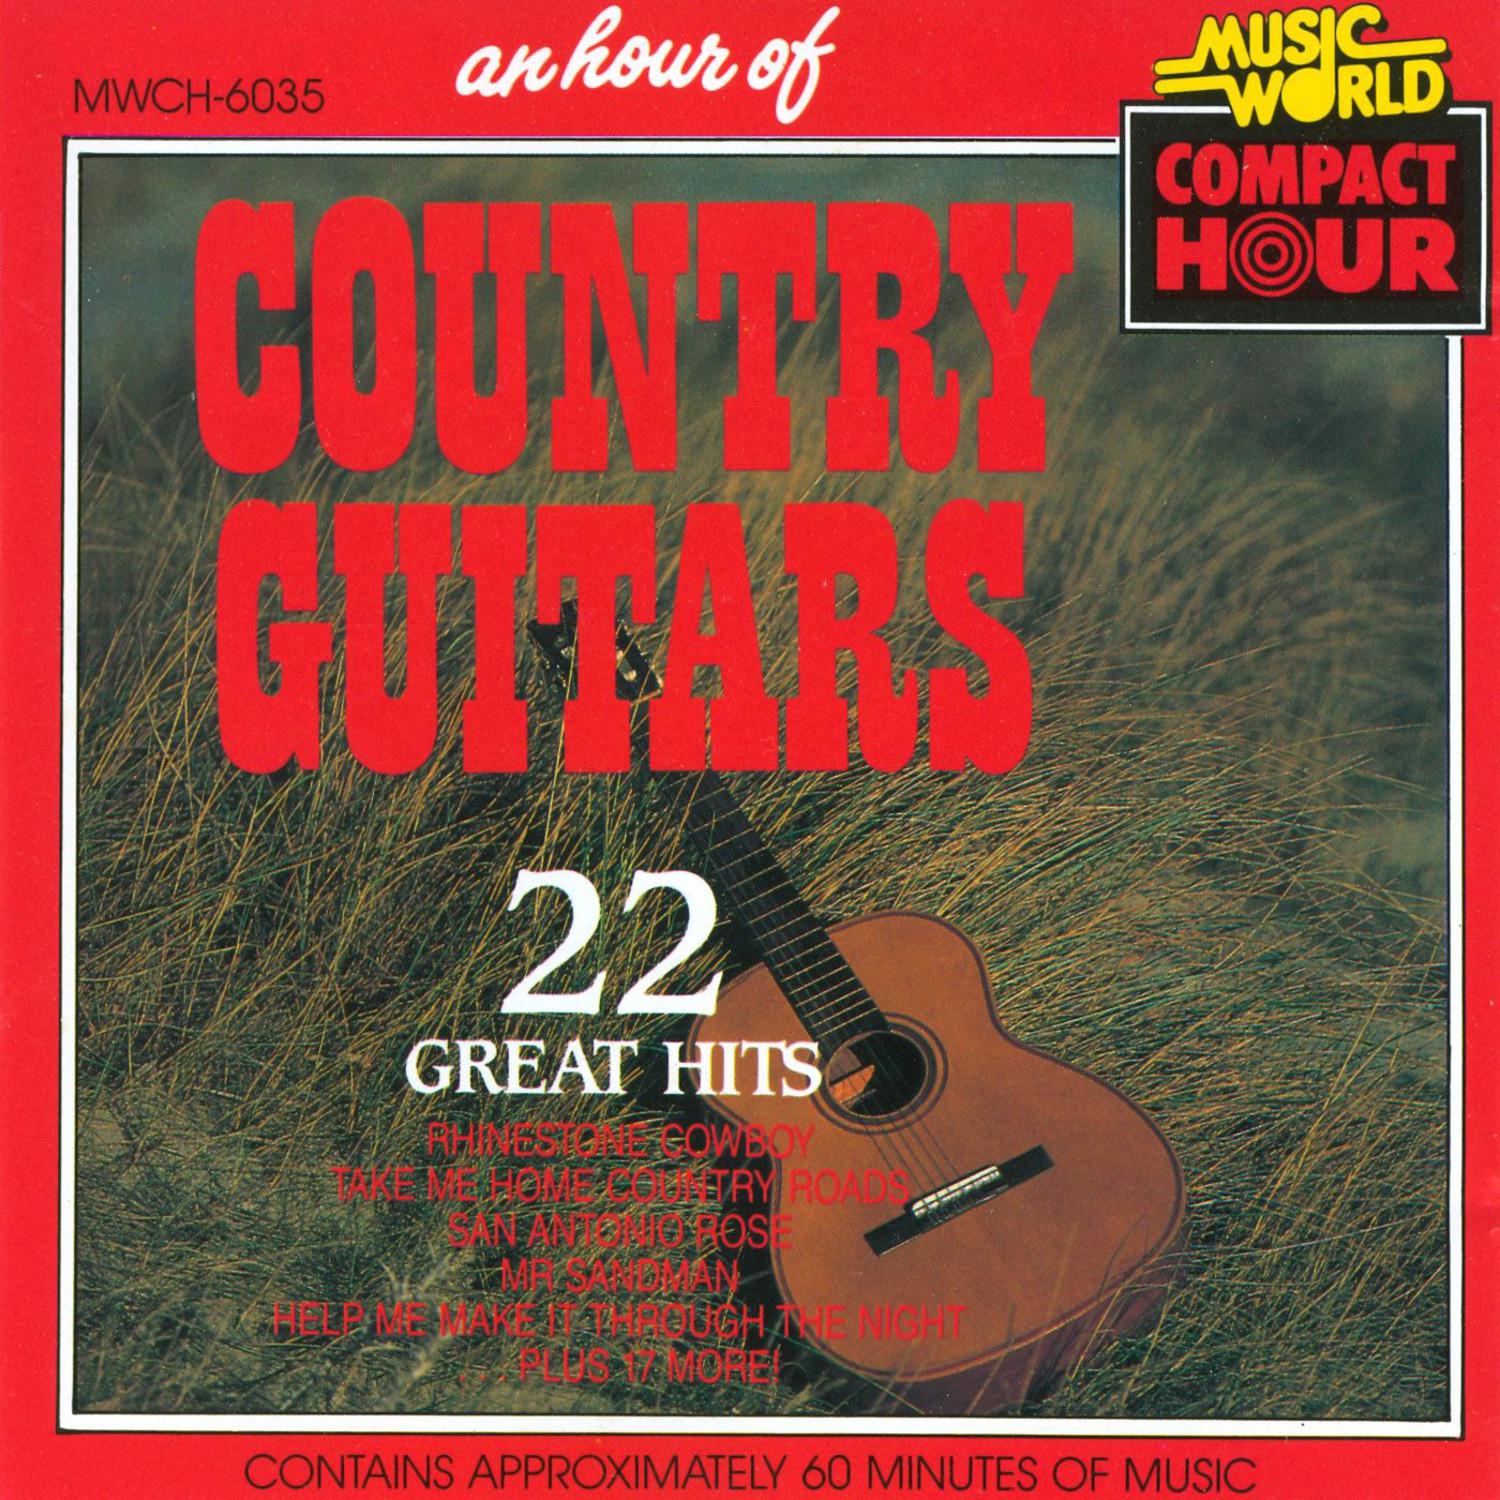 An Hour Of Country Guitars - 22 Great Hits